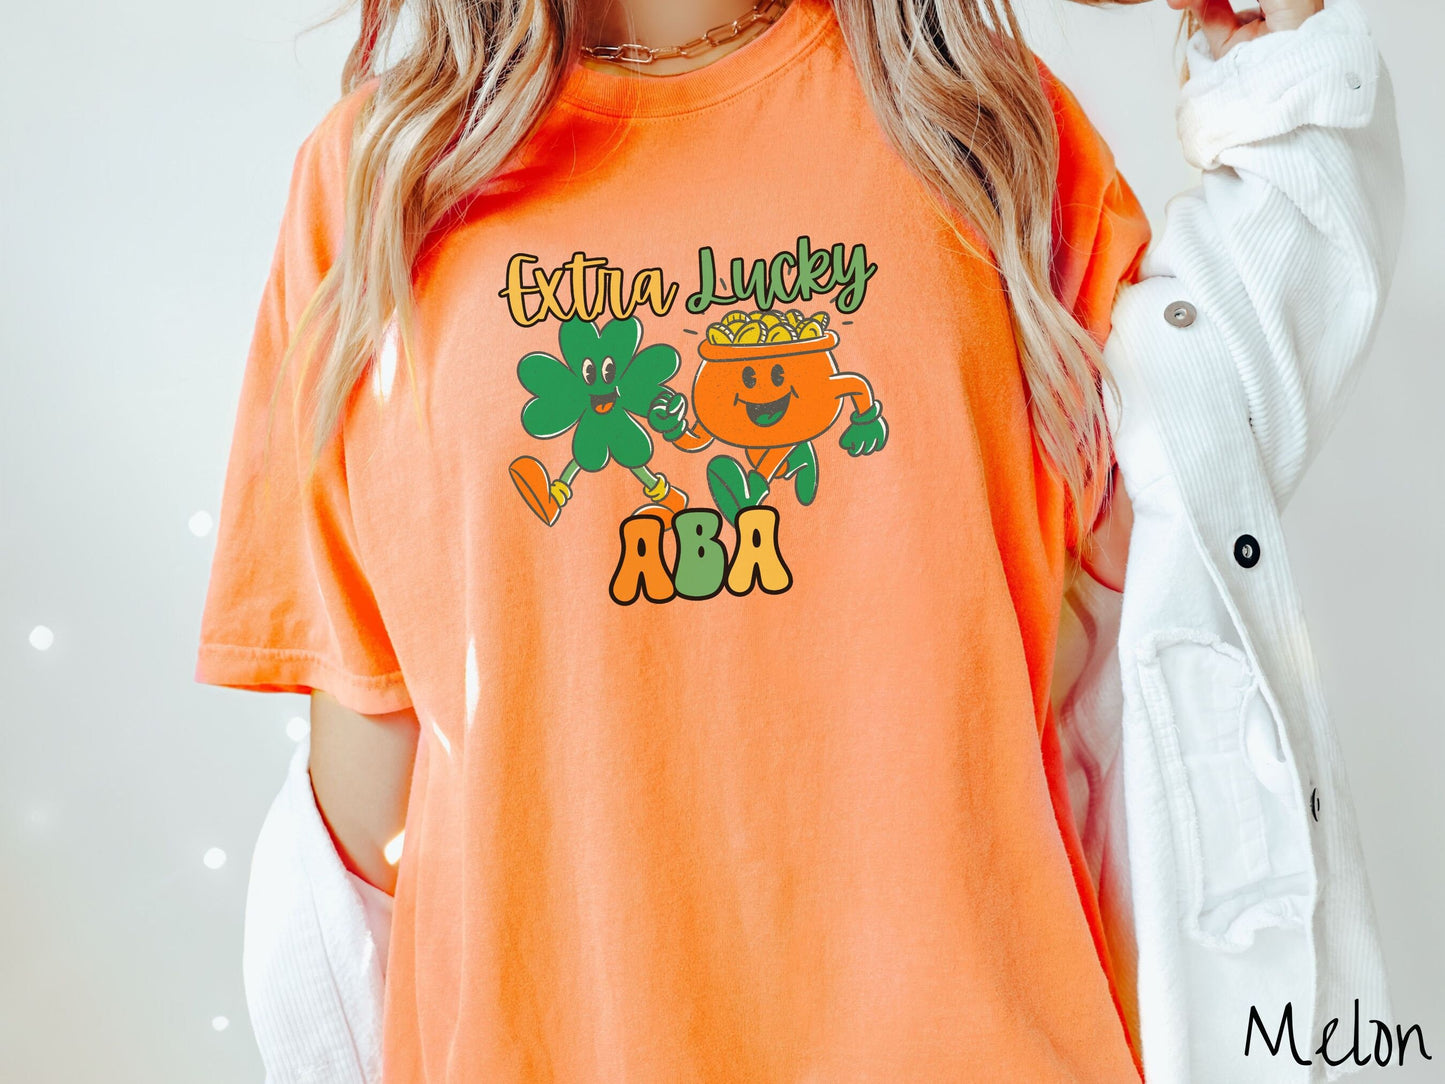 A woman wearing a vintage, melon colored shirt with the text Extra Lucky ABA in yellow, orange, and green font. Between the text are a green clover and orange pot of gold smiling and walking together in step.